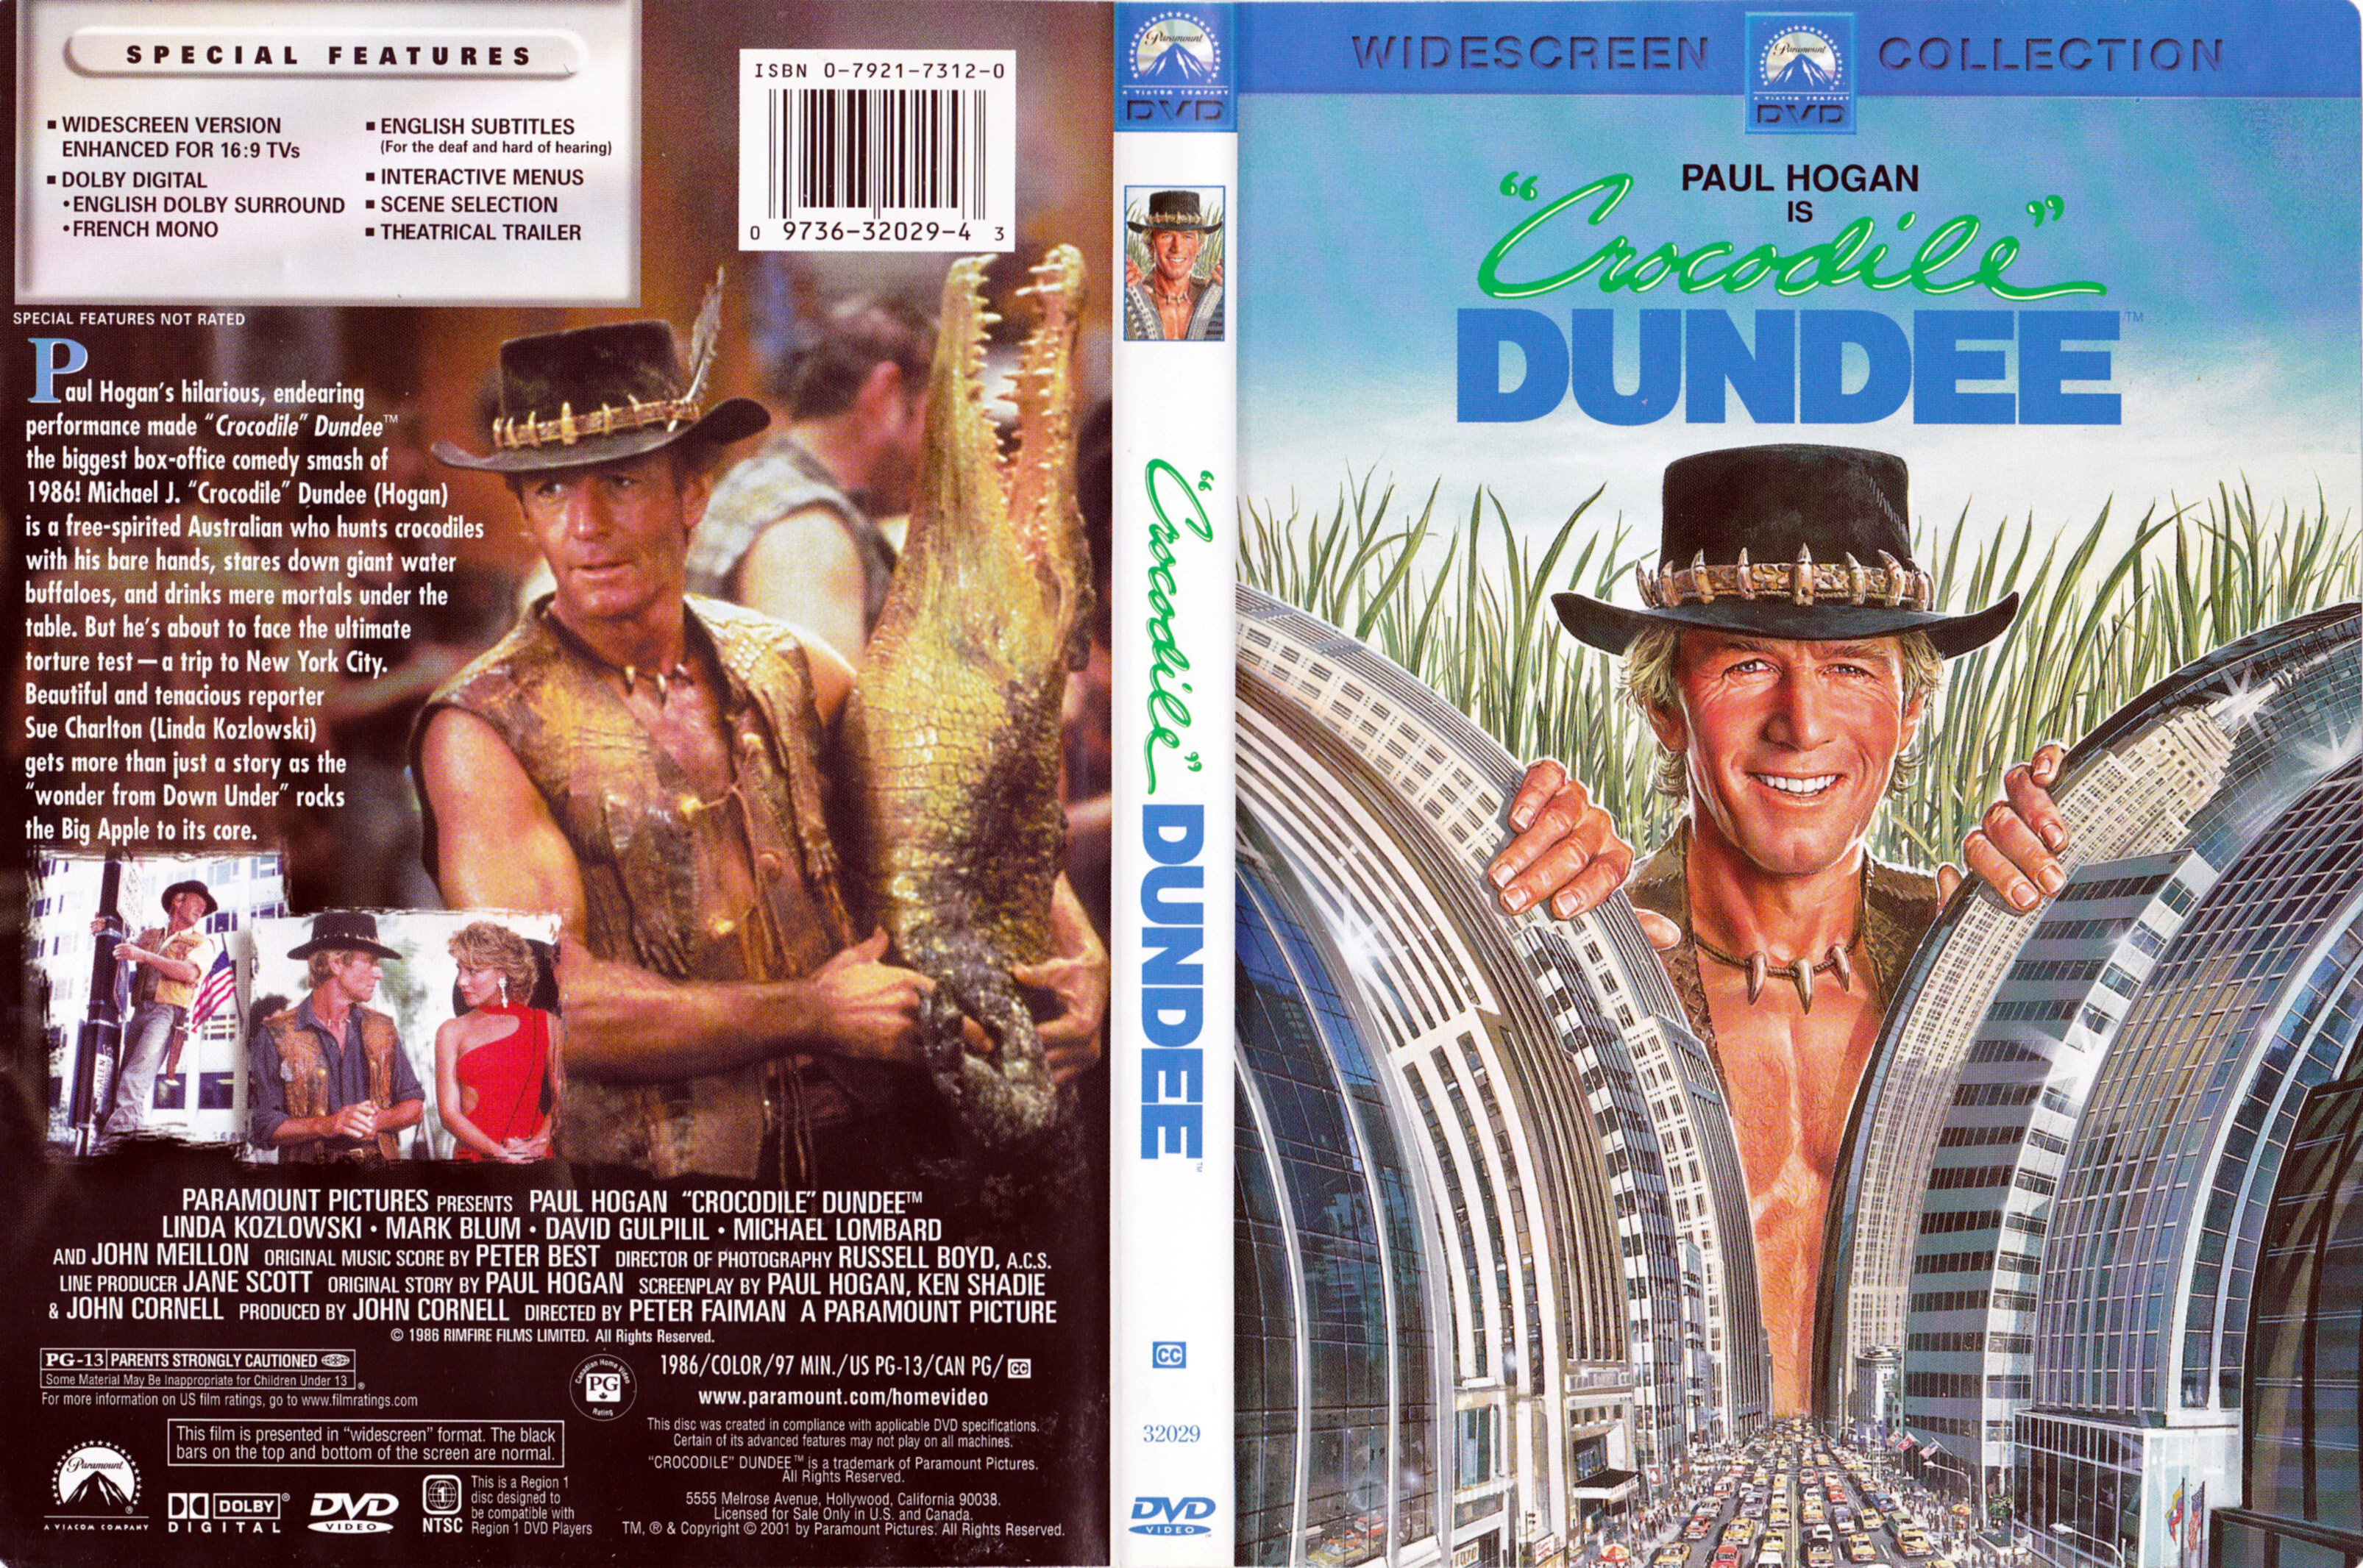 Jaquette DVD Crocodile Dundee (Canadienne)